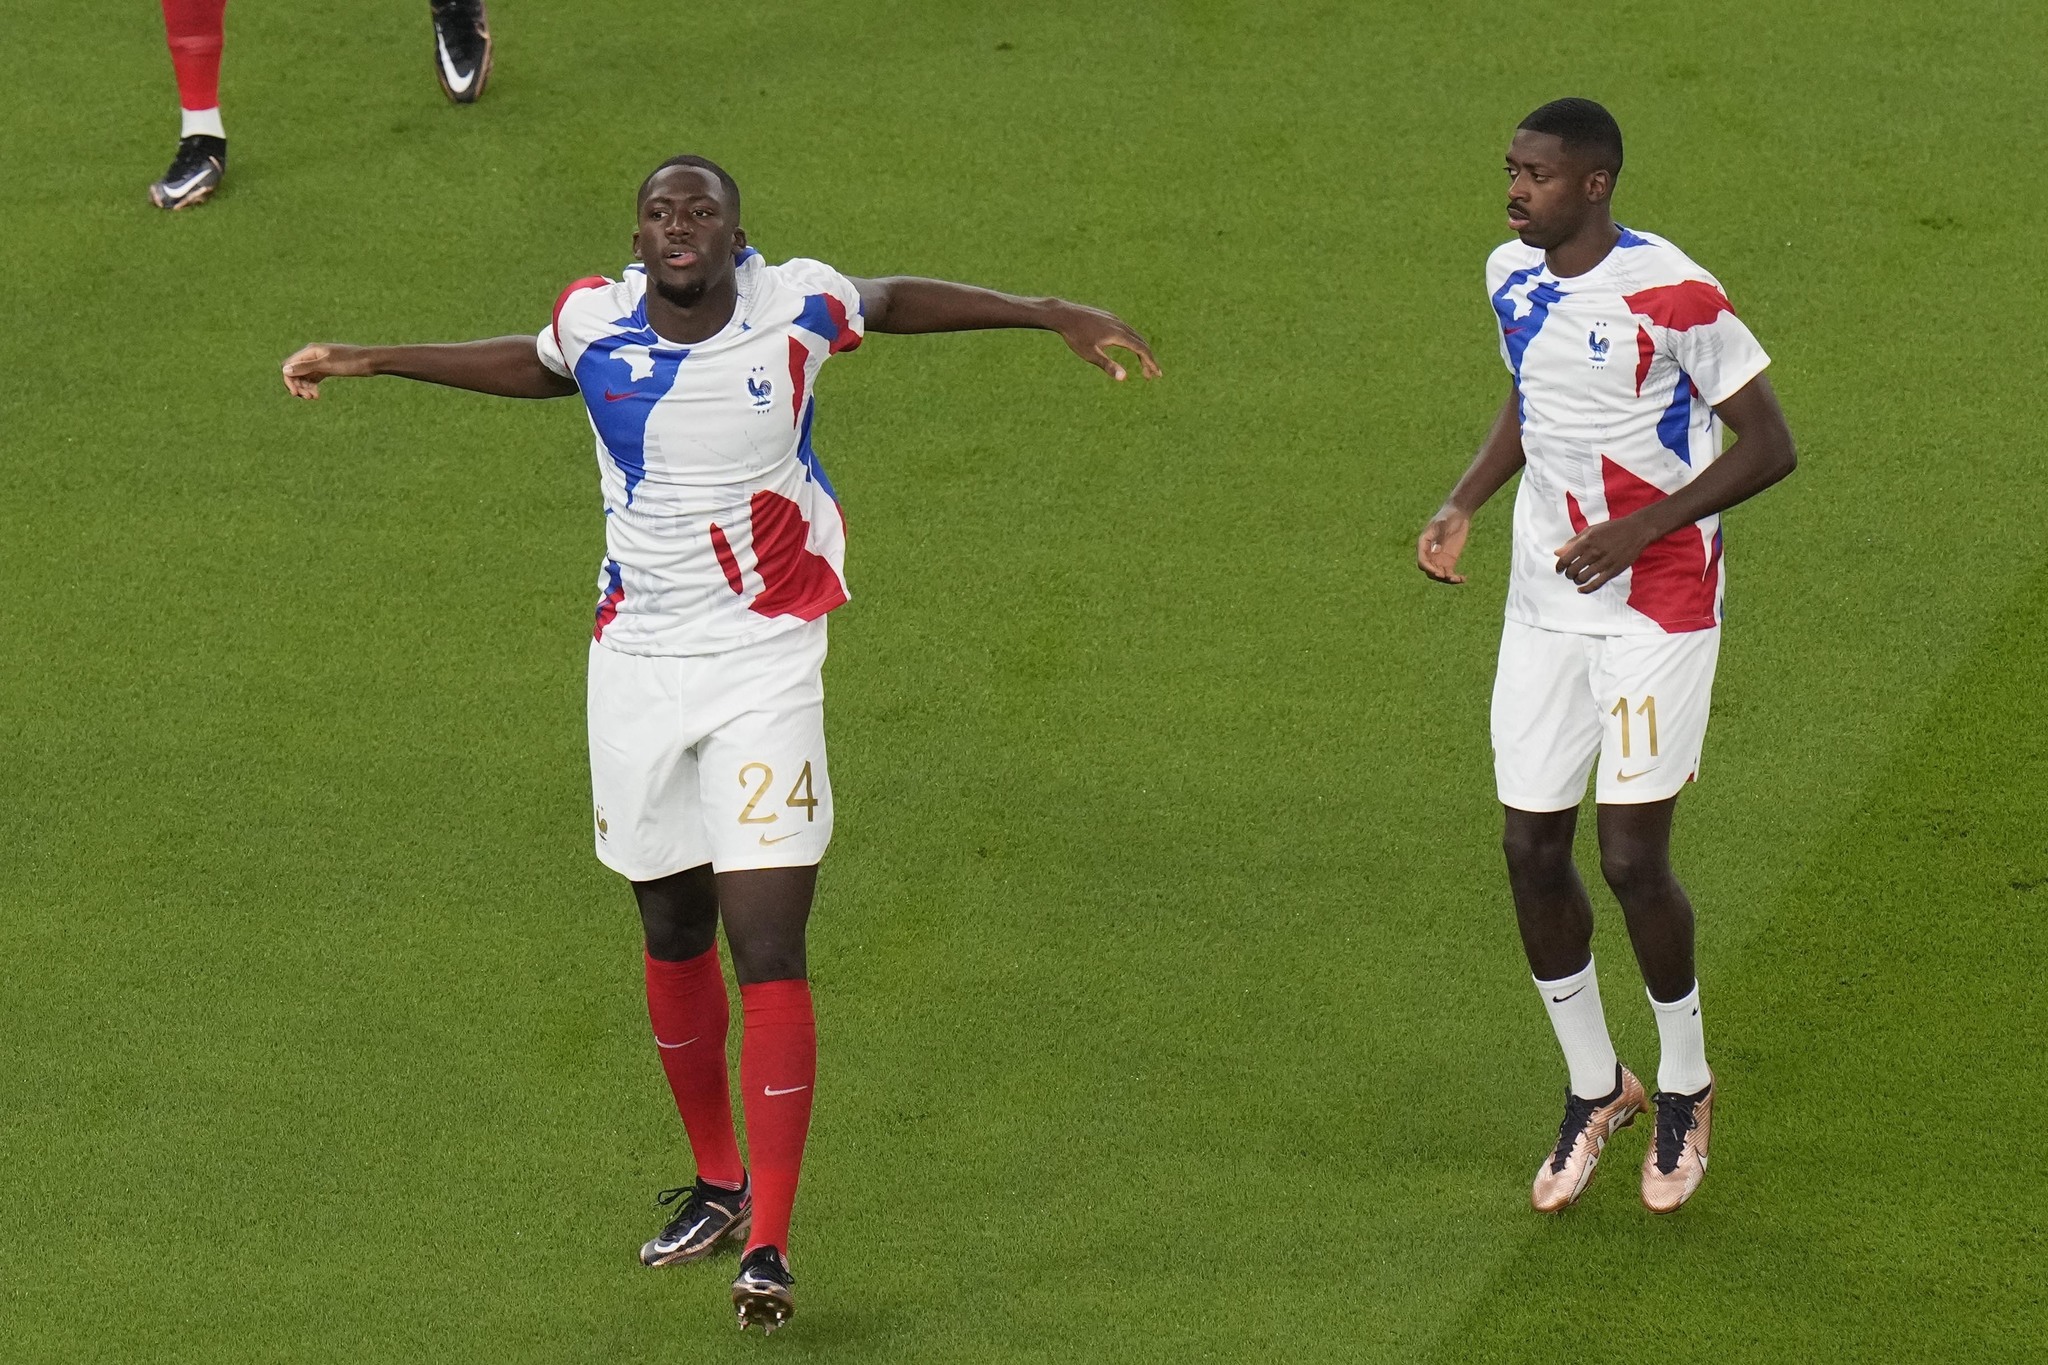 France's William Saliba, left, and France's Ousmane Dembele warm up prior to the start of the World Cup group D soccer match between France and  lt;HIT gt;Australia lt;/HIT gt;, at the Al Janoub Stadium in Al Wakrah, Qatar, Tuesday, Nov. 22, 2022. (AP Photo/Alessandra Tarantino)